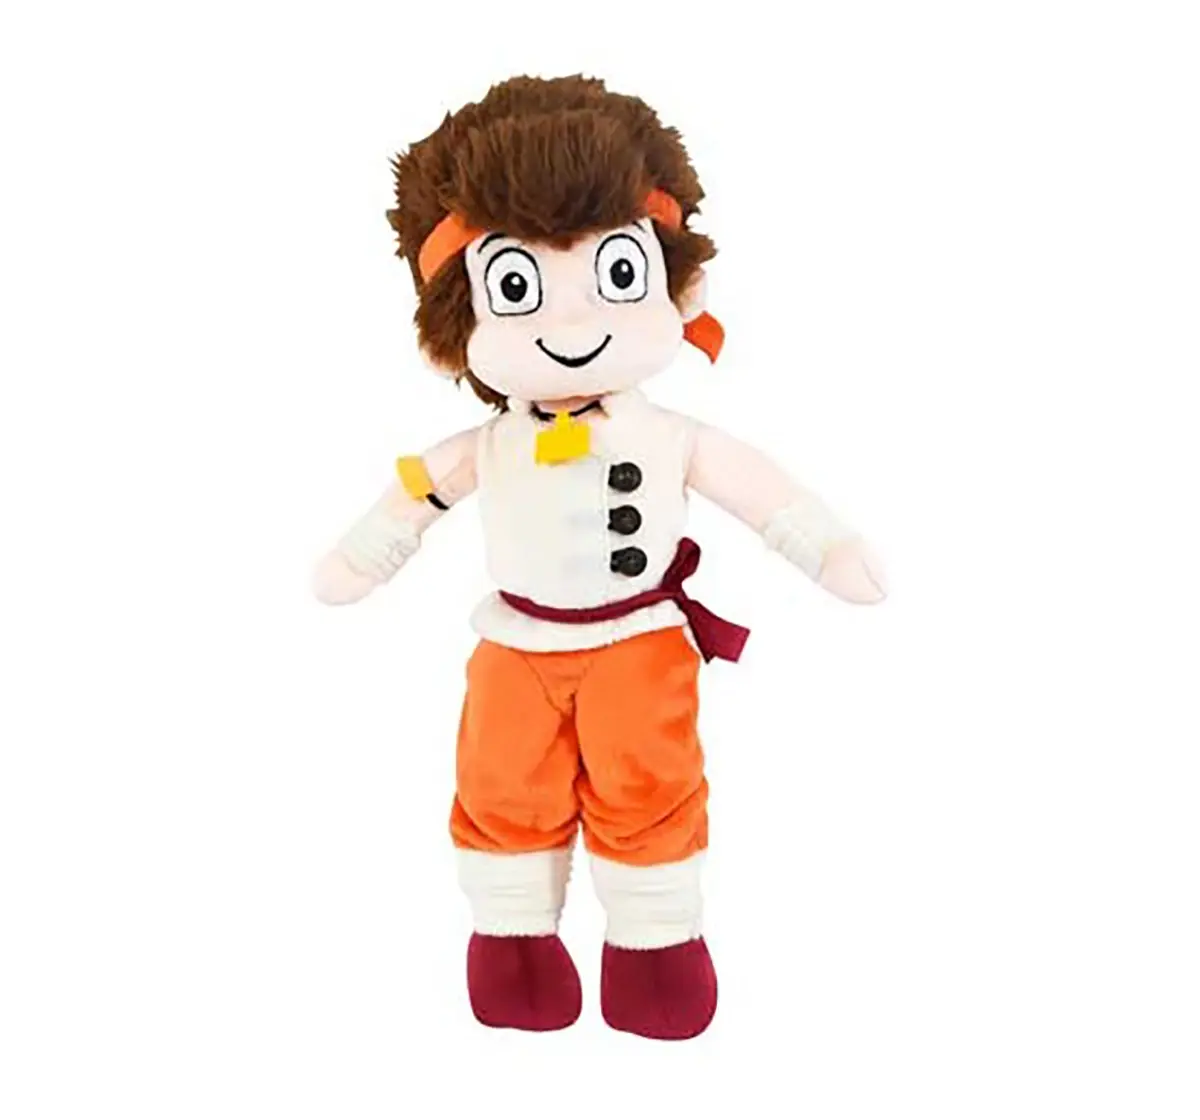 Chhota Bheem Kung Fu Bheem Action Plush Toy - 35Cm Character Soft Toys for Kids age 3Y+ - 35 Cm 